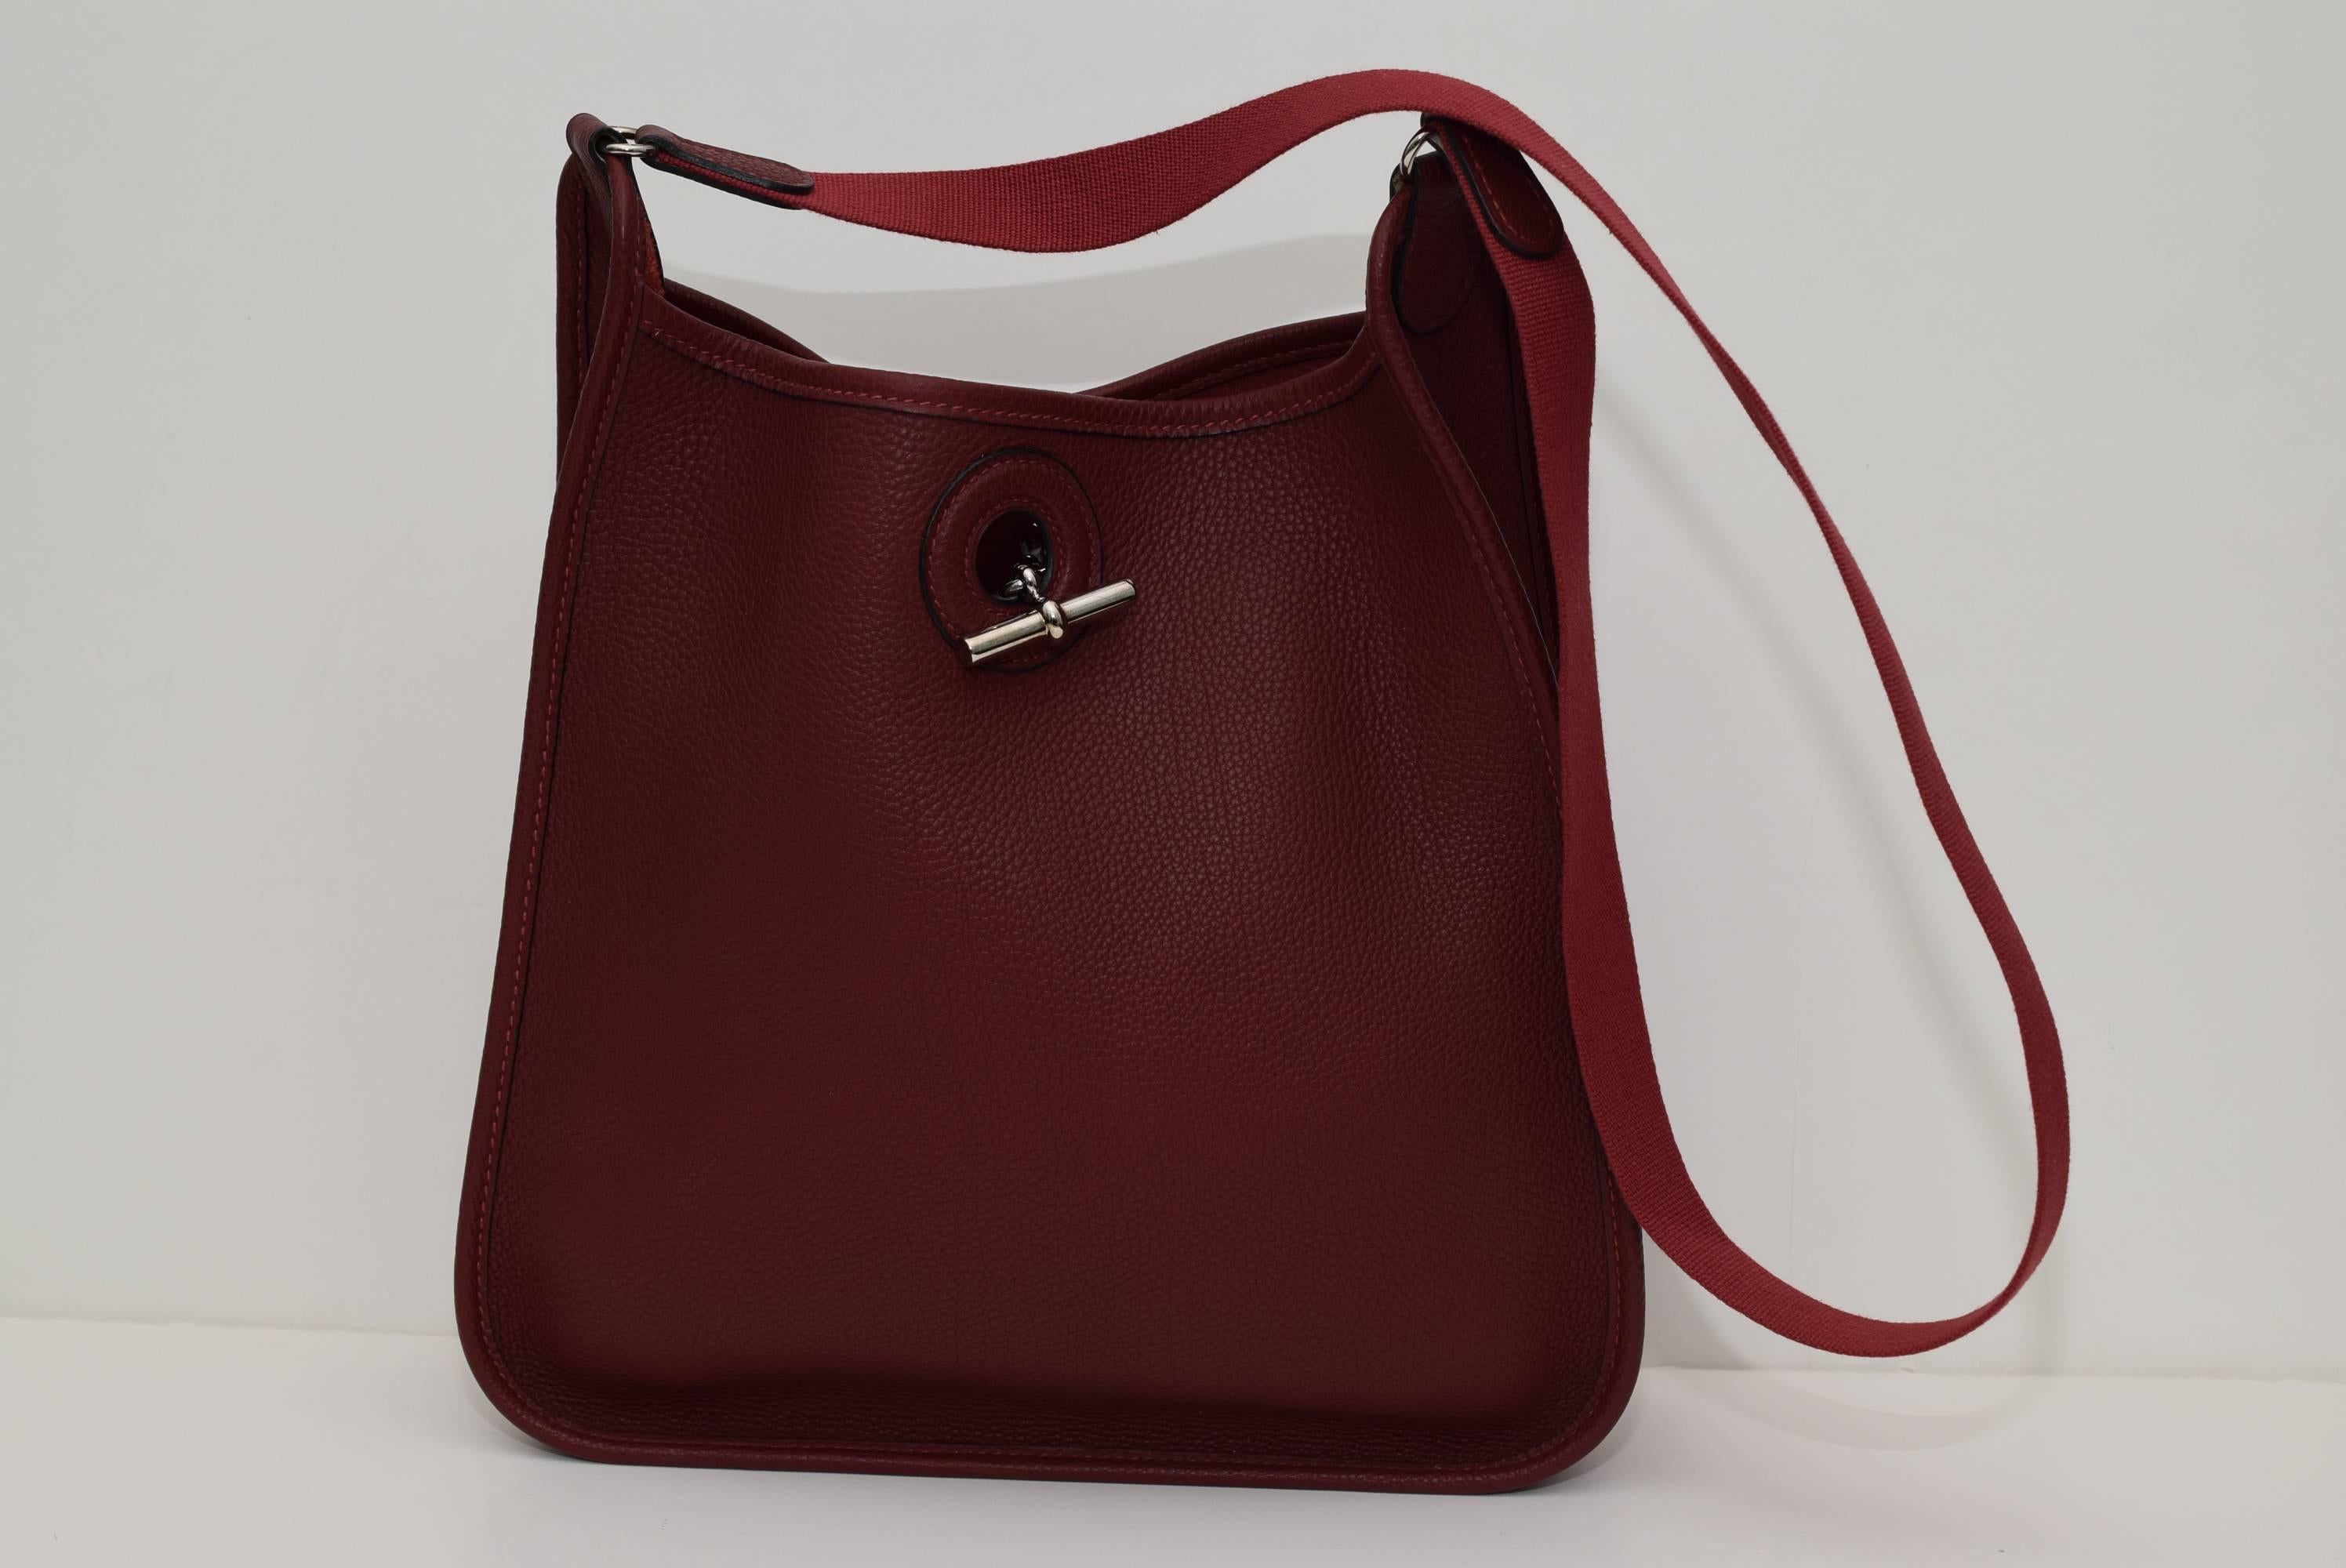 Hermes Vespa PM in Wine Red color. Size 12 X 10.5 X 3.25 inches with 17